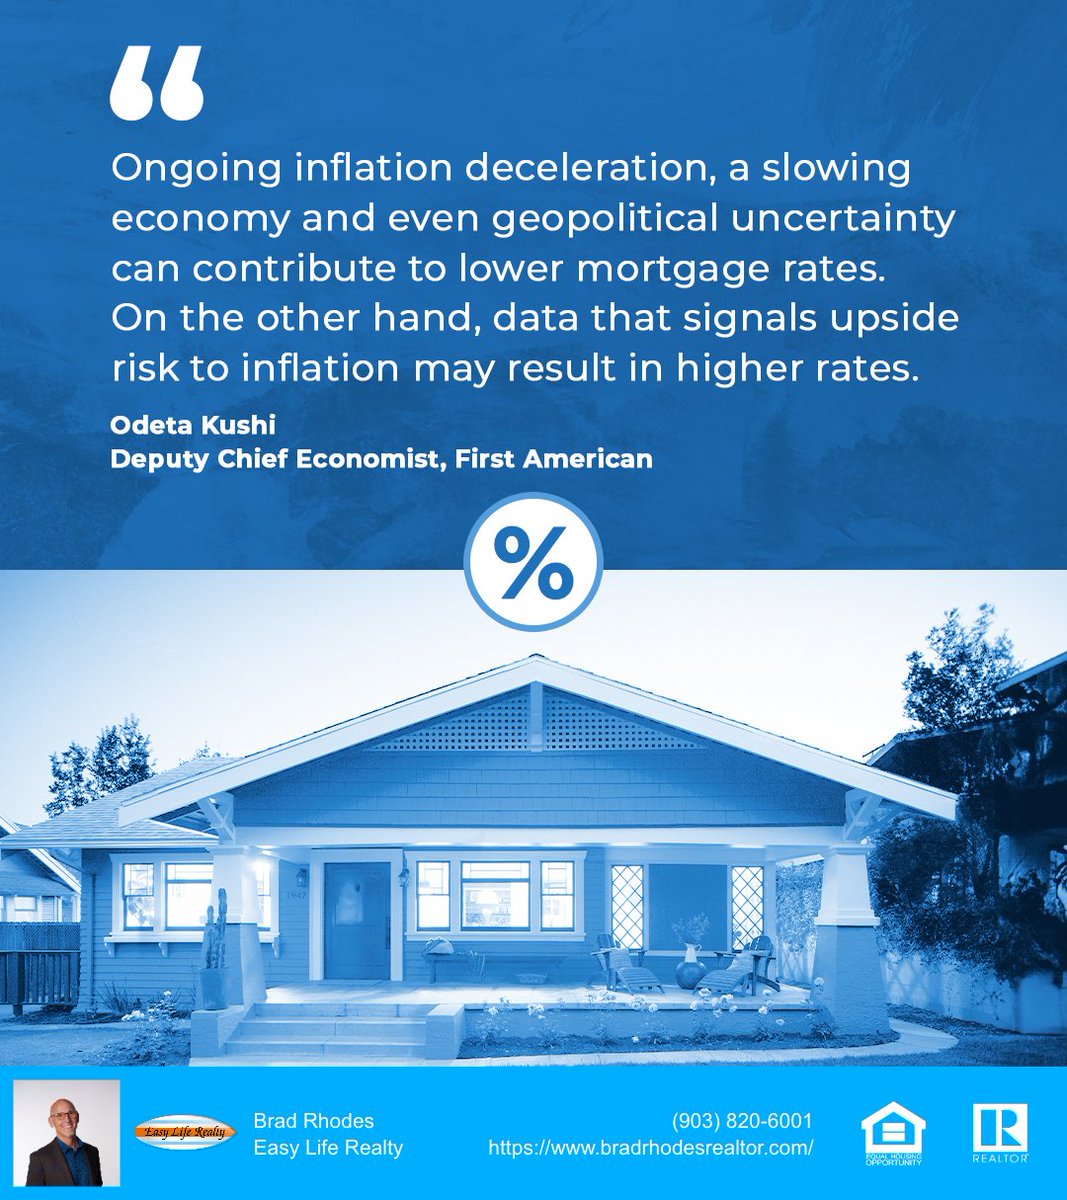 Ever wonder what makes mortgage rates go up or down? From economic trends to inflation, it's a complex web. And trying to keep up with the latest news on all those details can be stressful. 

#mortgagerates #realestateagent #keepingcurrentmatters